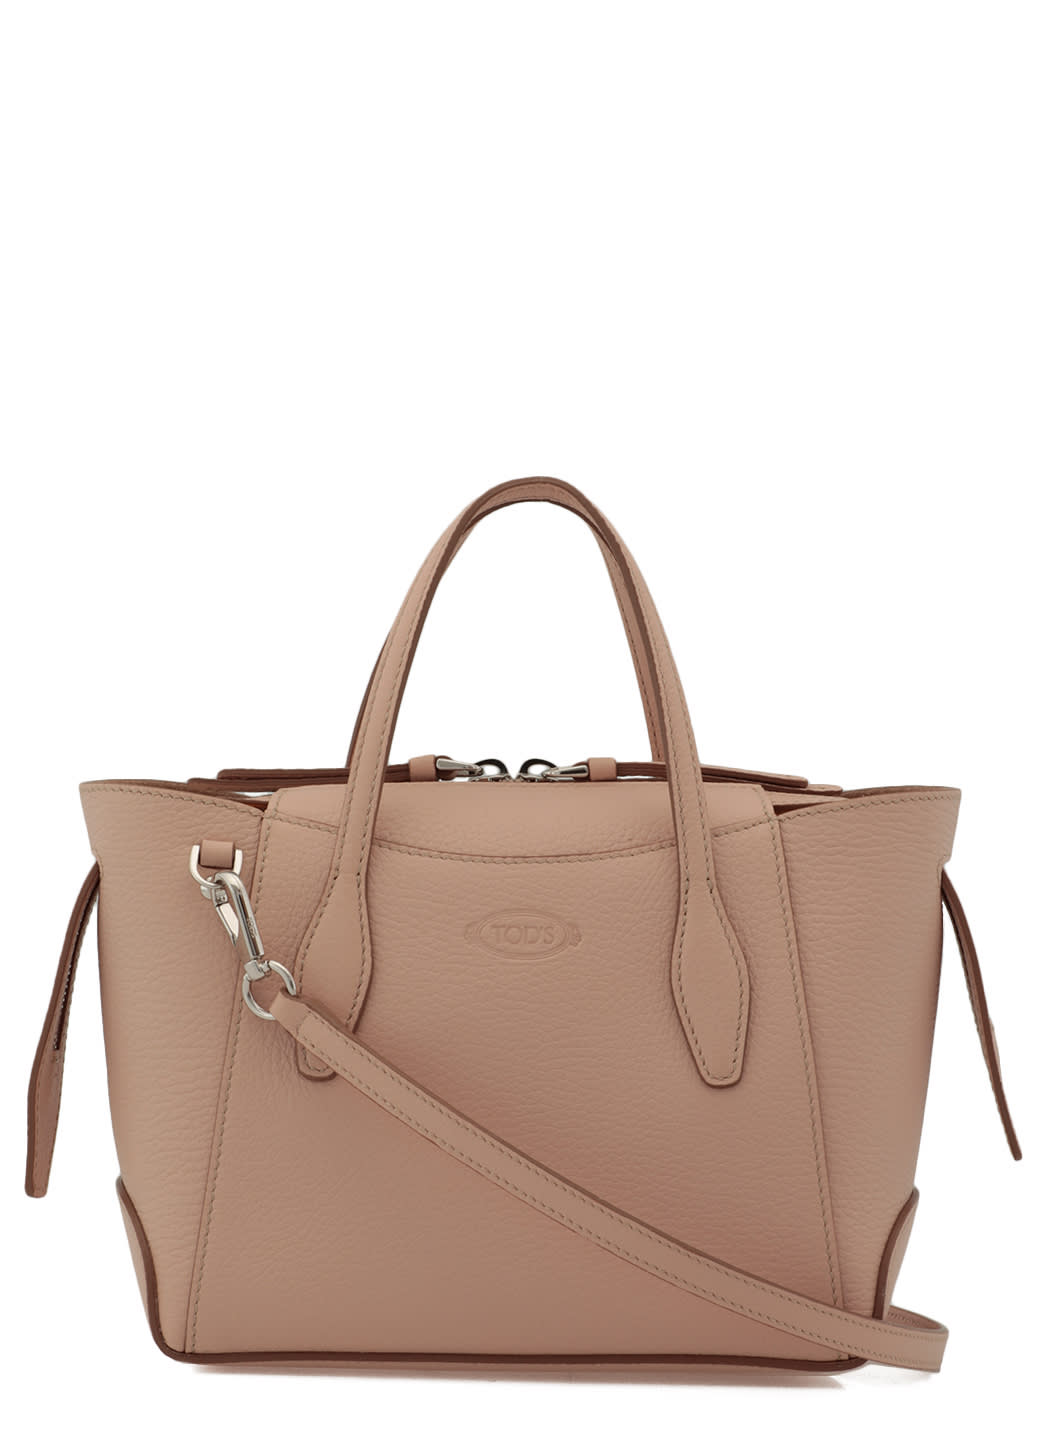 Tods Calf Leather Bag